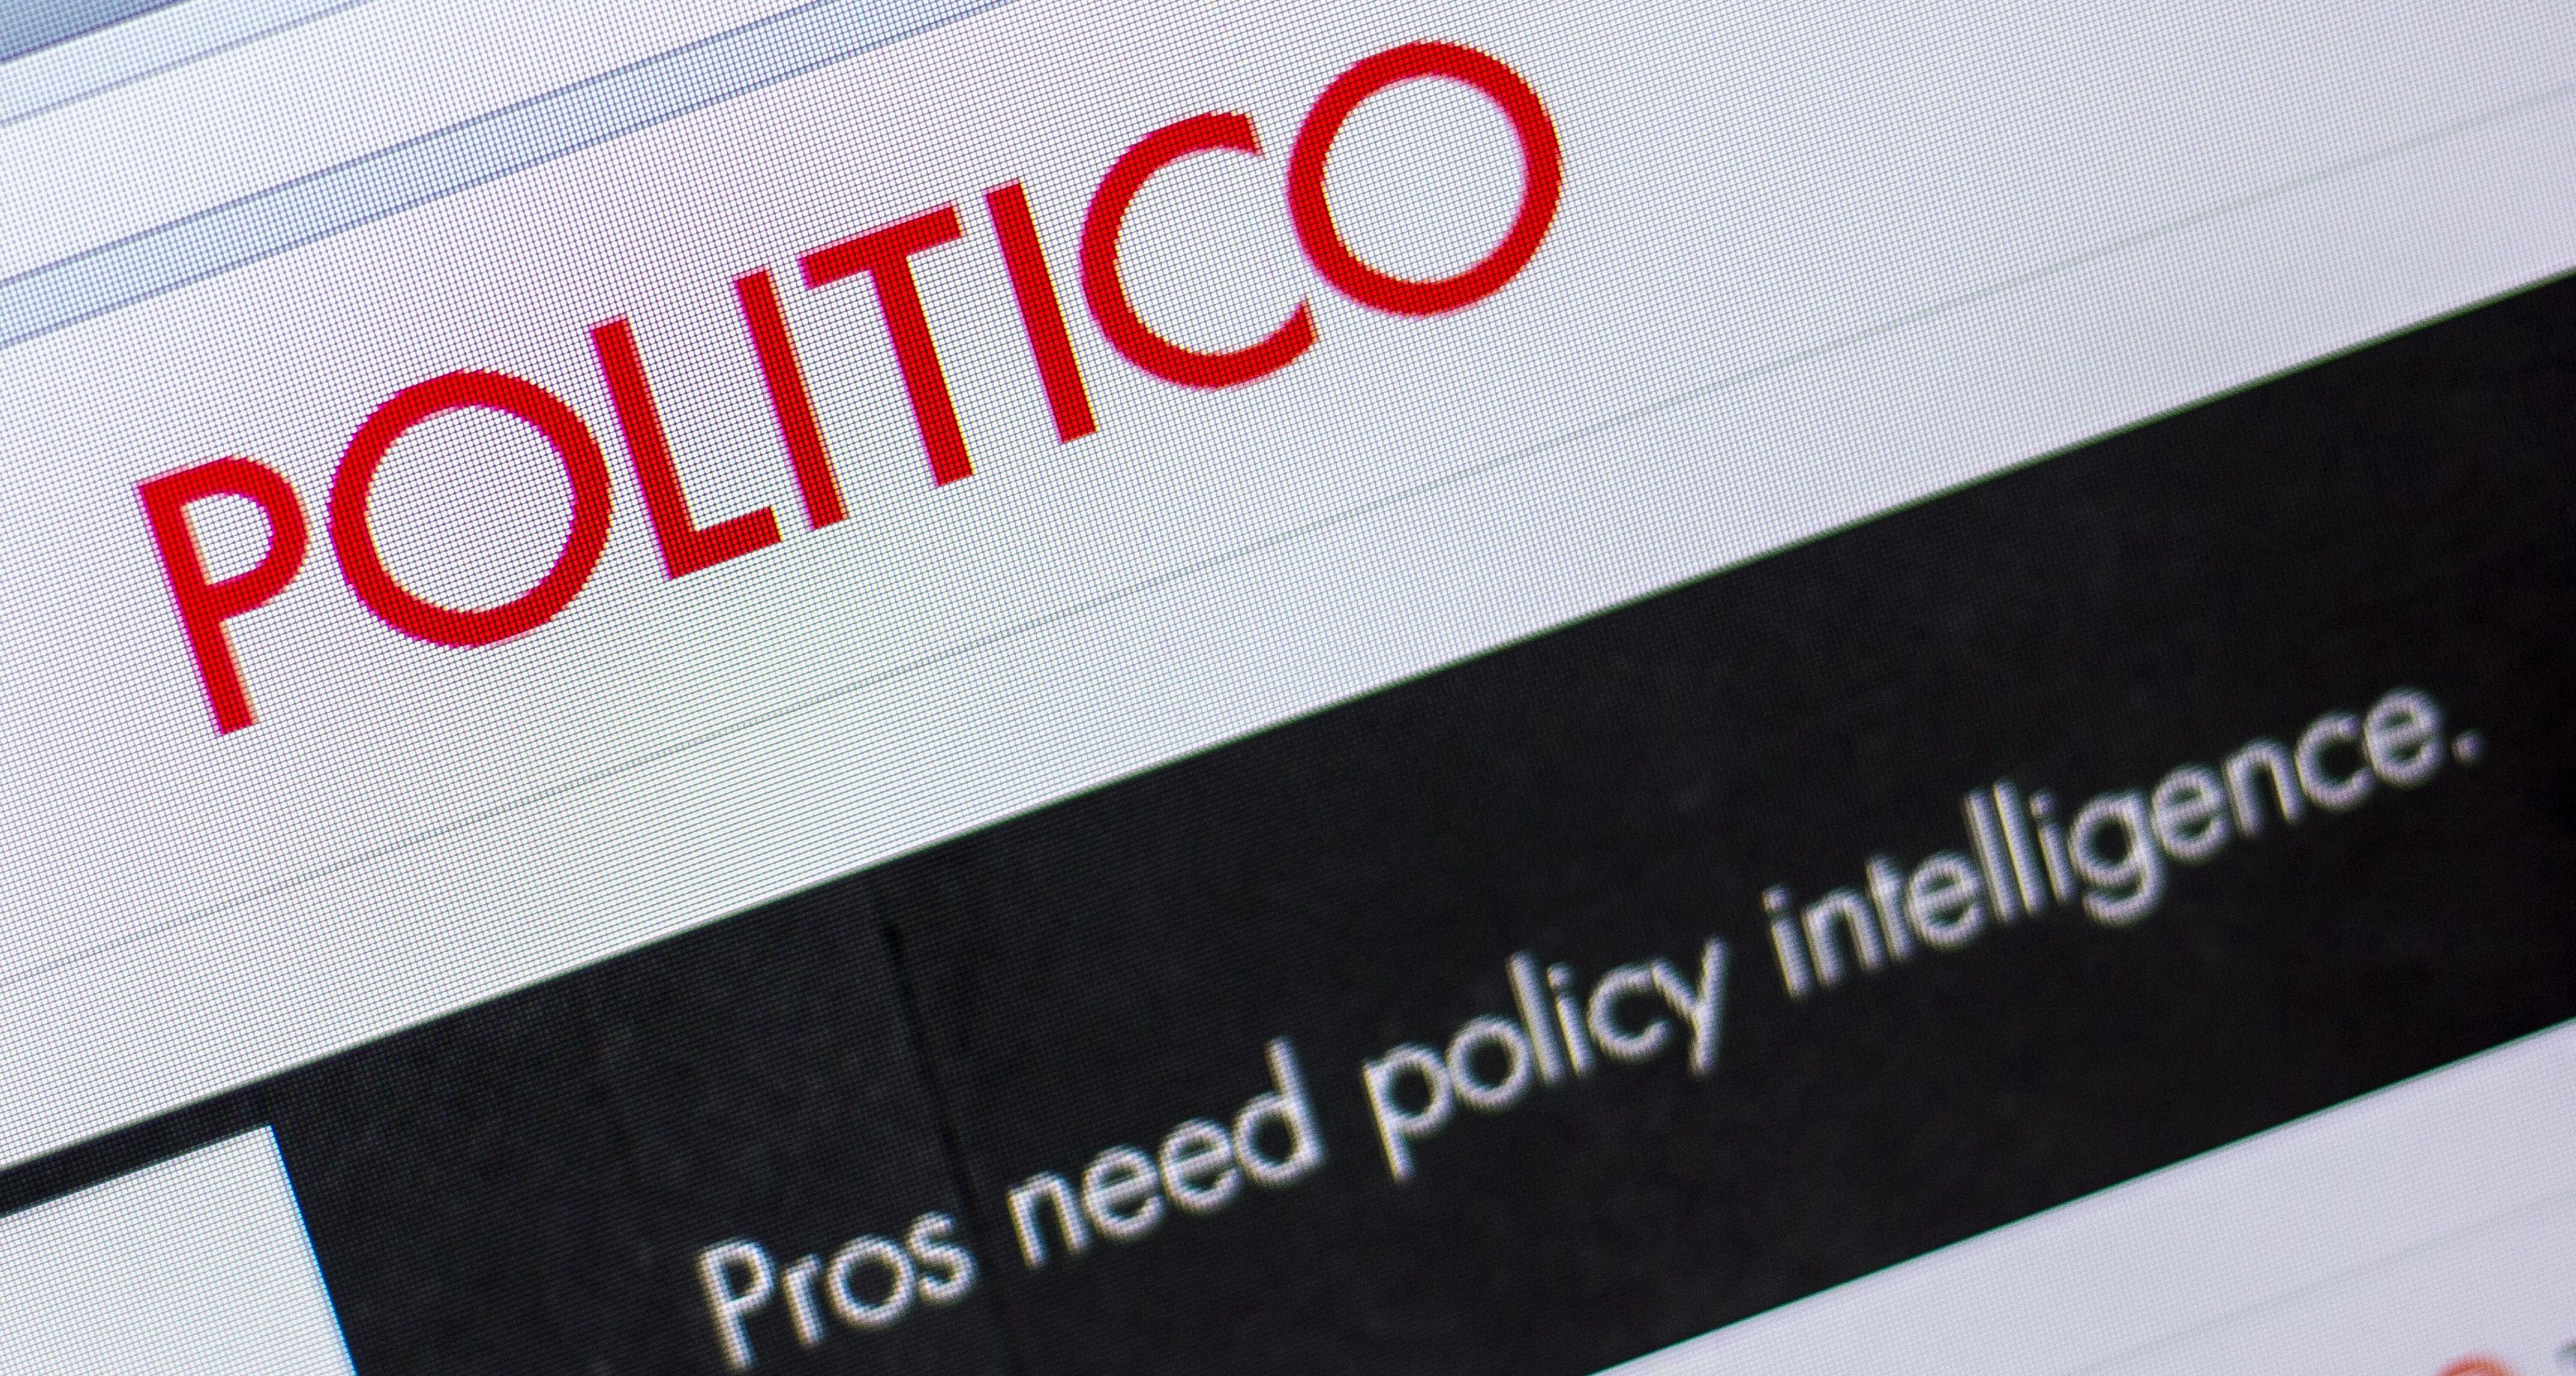 Pentagon enlists Politico to amplify funding woes claim